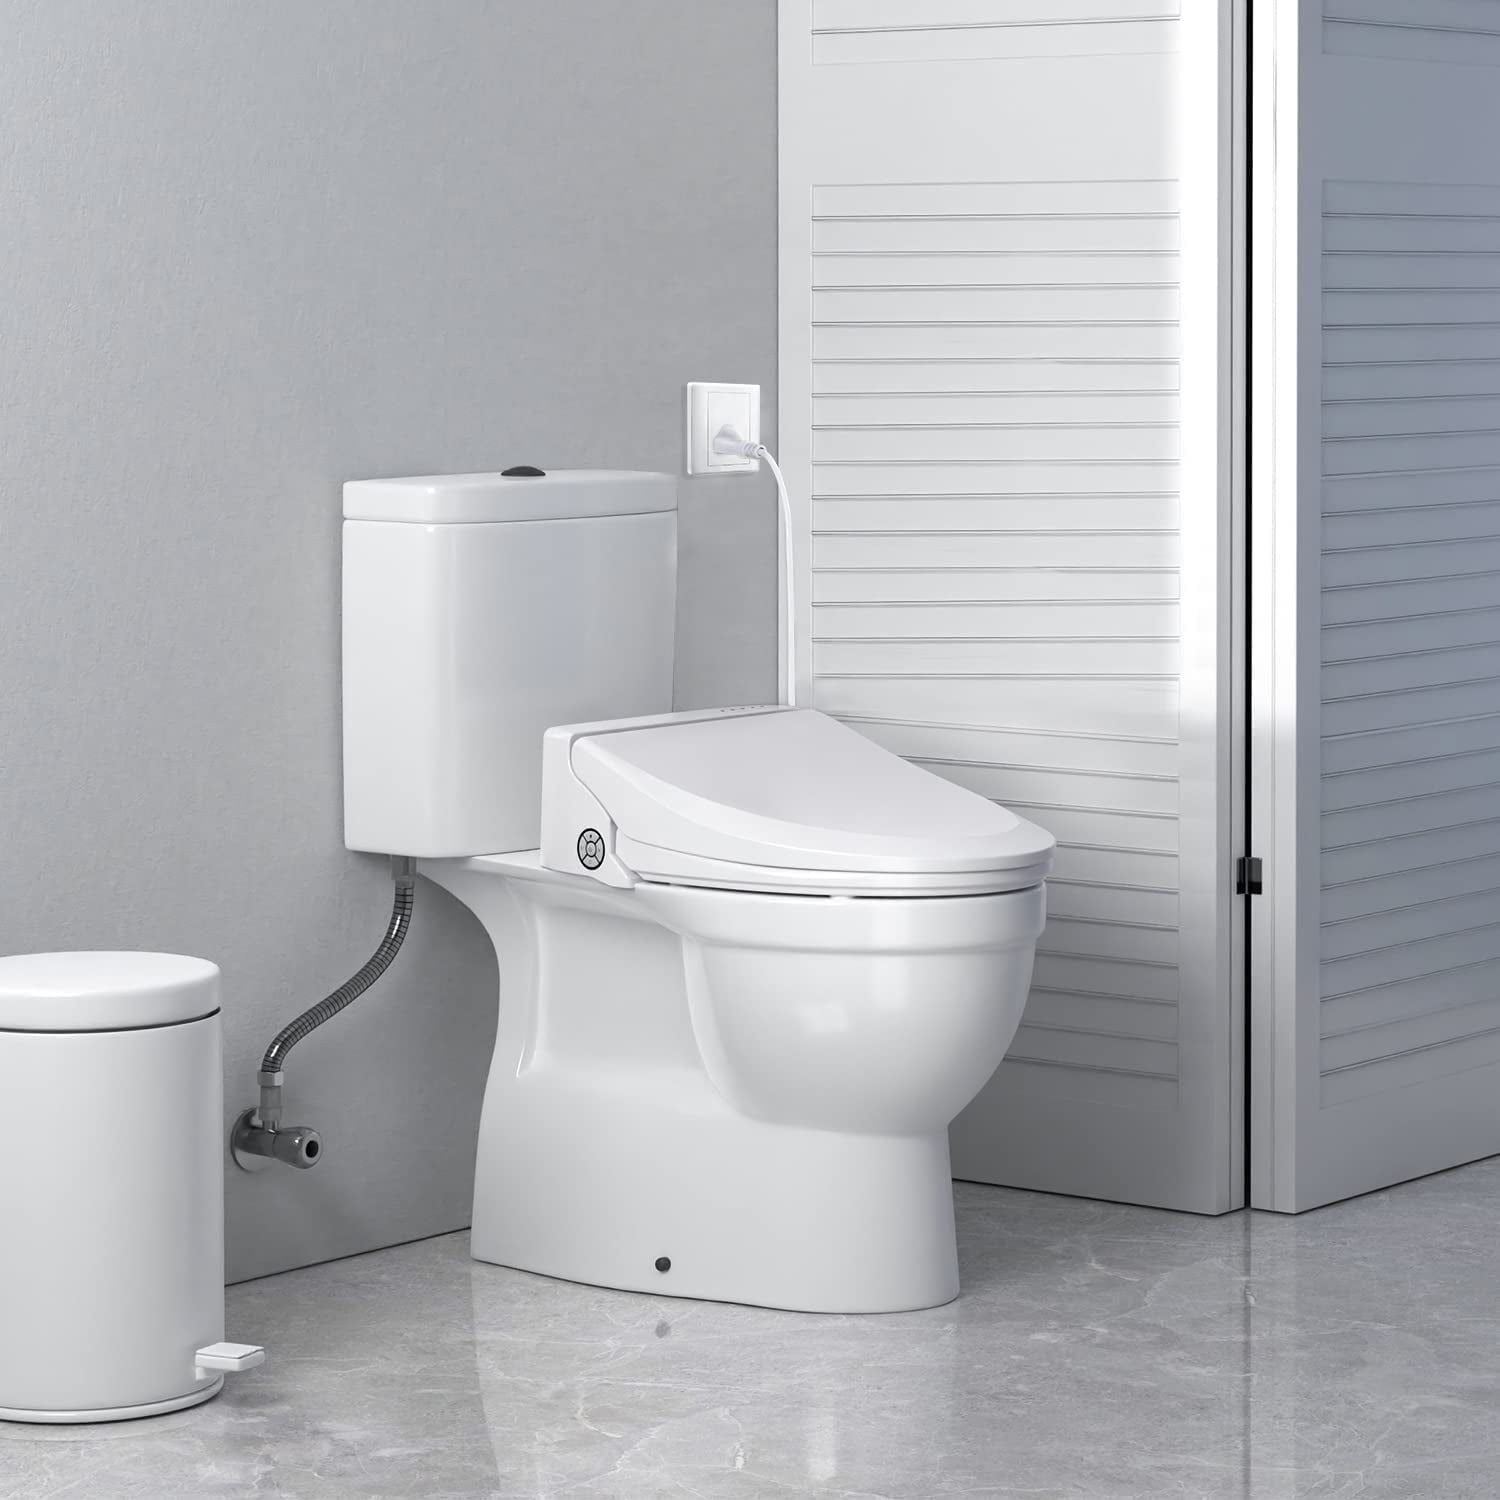 Aoibox Electric Bidet Seat for Elongated Toilet in White W LED Light, Heating, Warm Water Washing, Hot Air Dryer Remote Control, Whhite